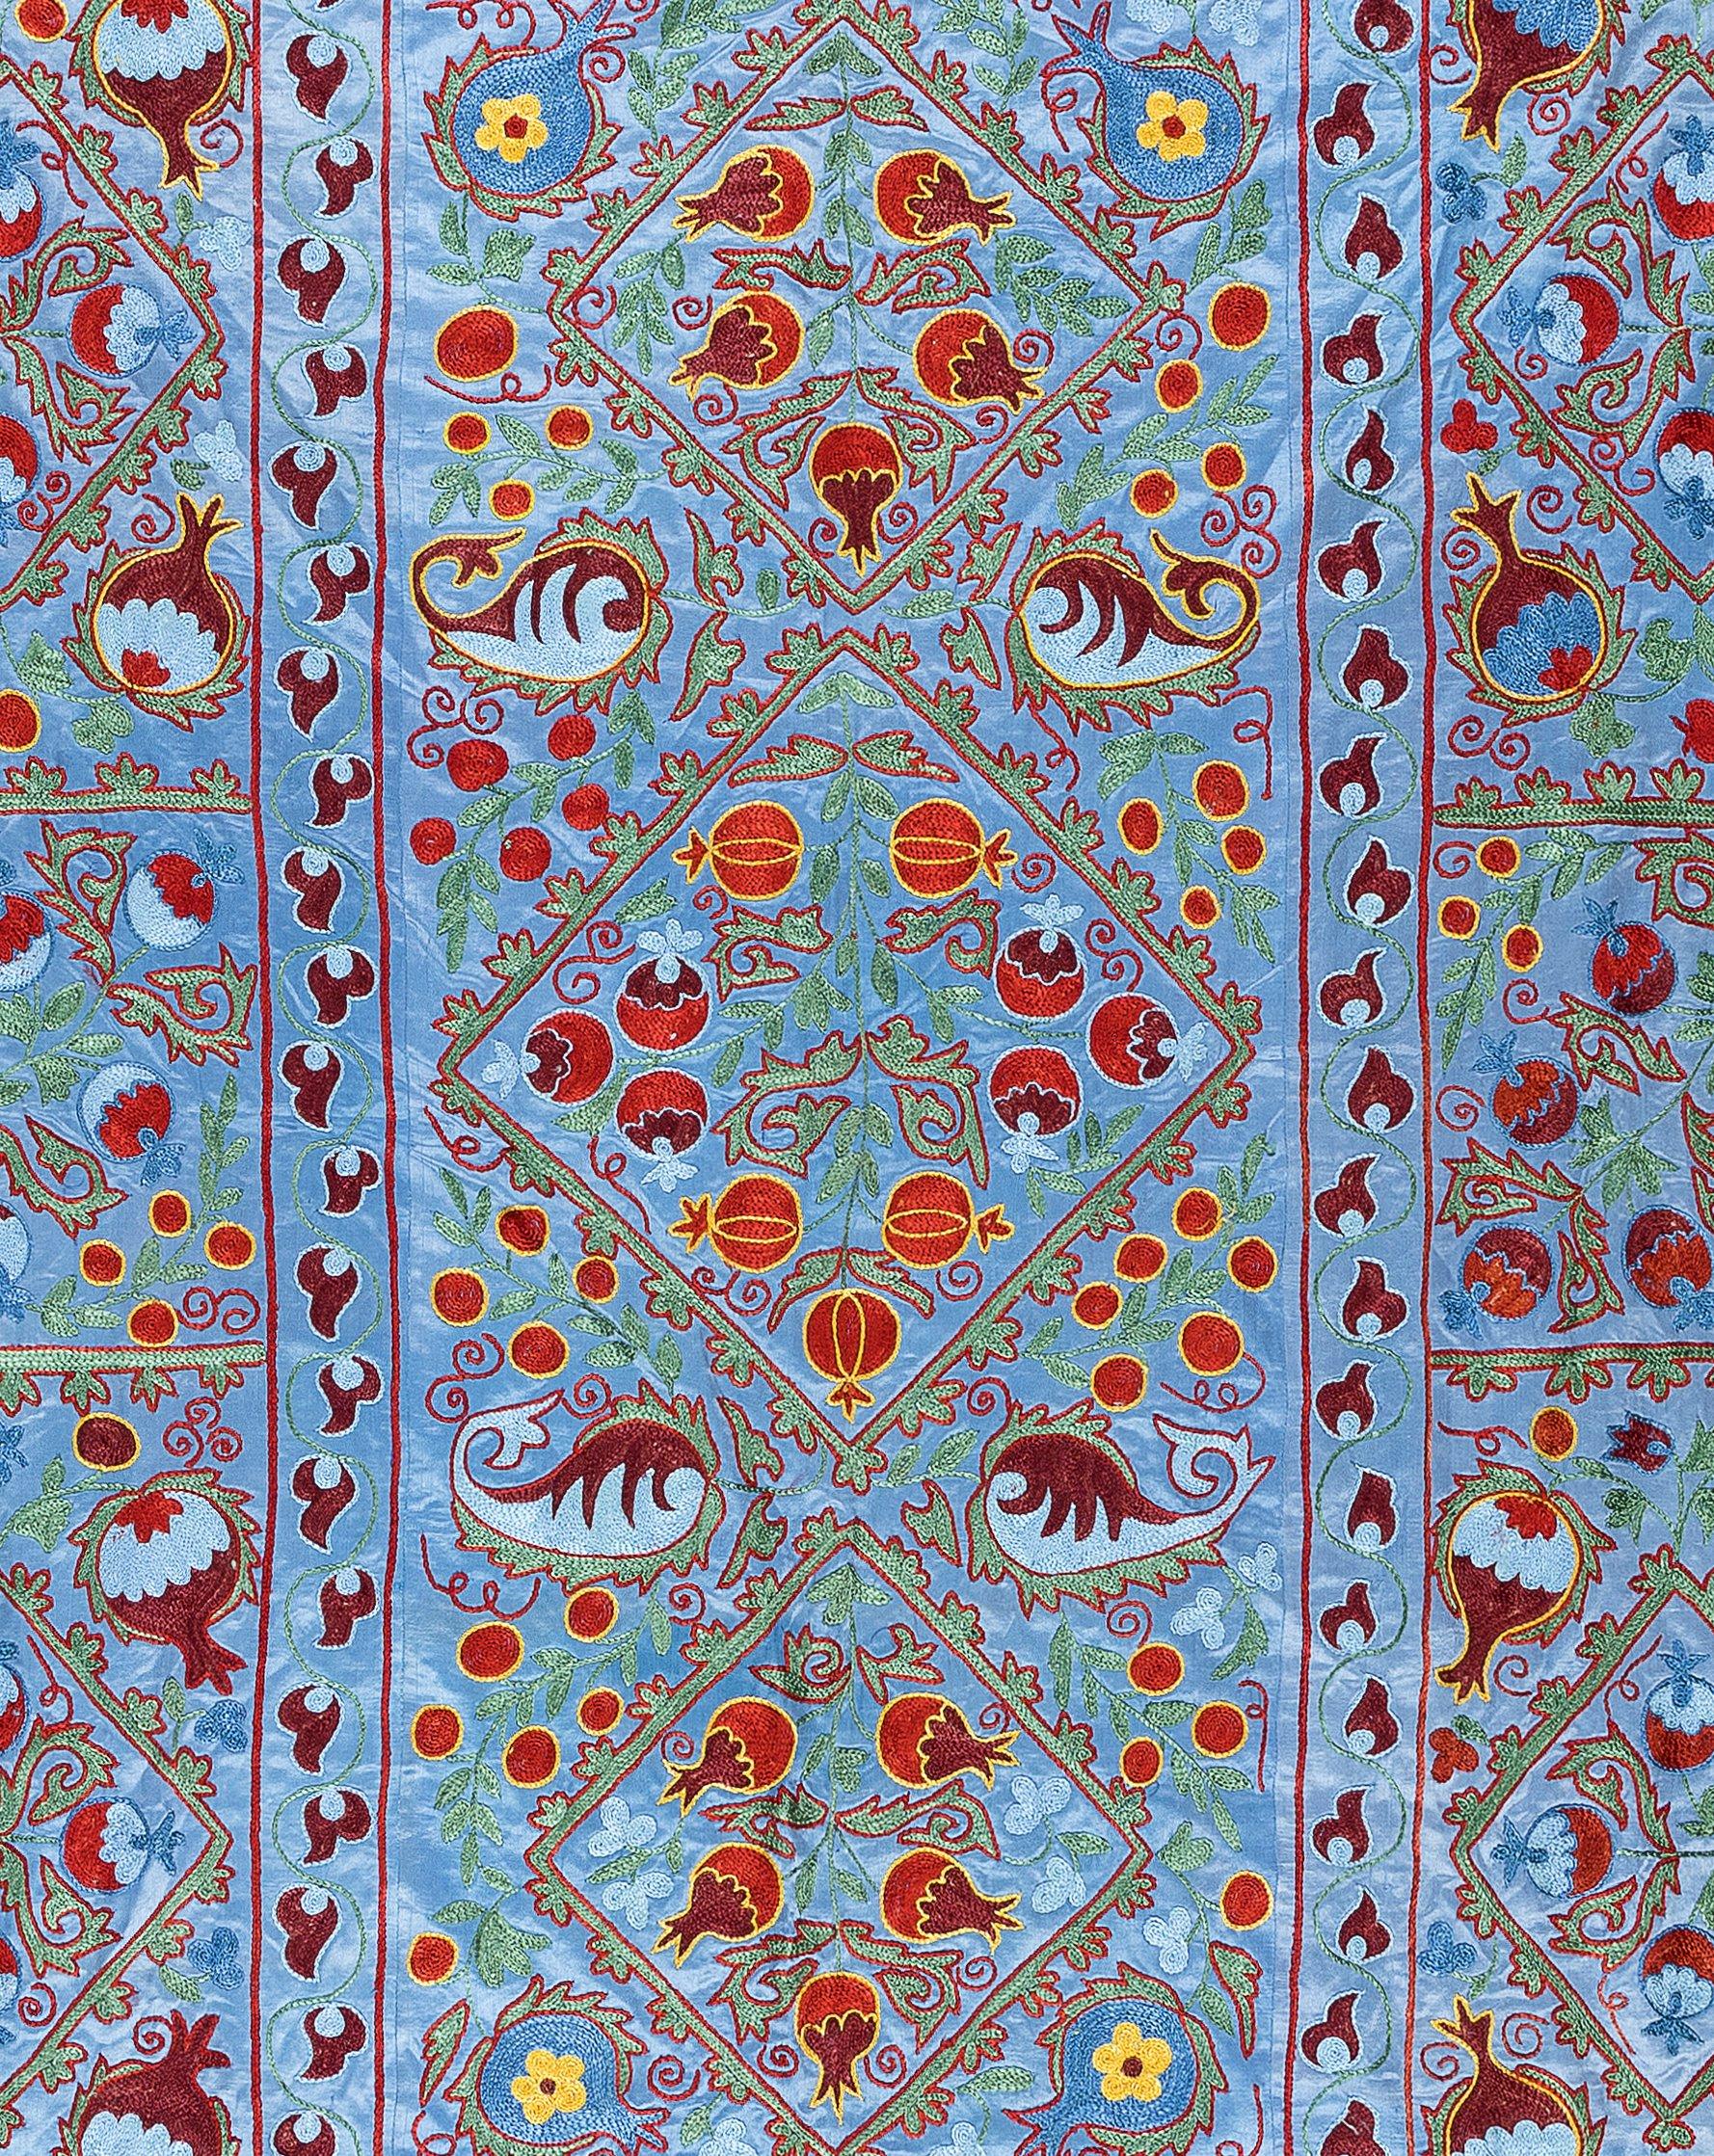 20th Century 5x7 Ft 100% Silk Suzani Bed Cover, Vintage Uzbek Hand Embroidered Wall Hanging